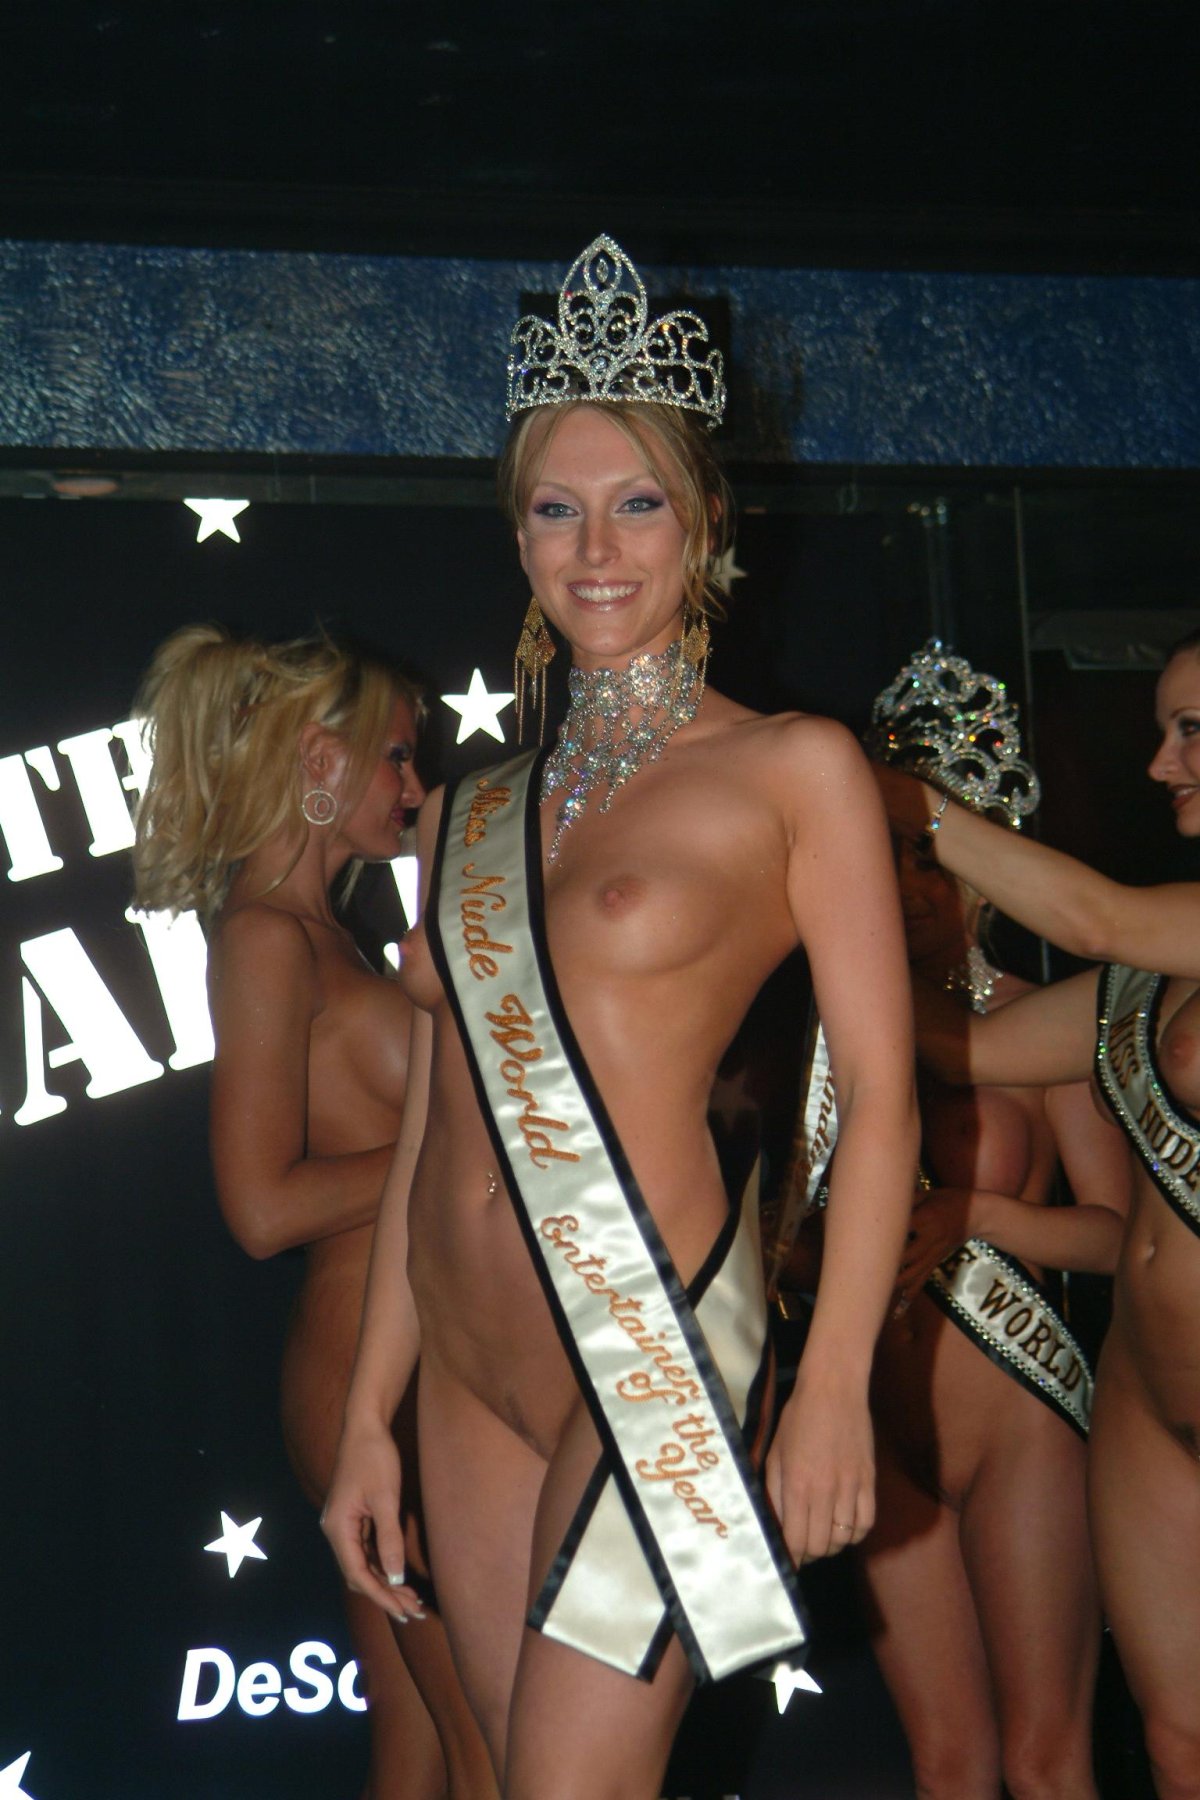 cas henderson recommends miss nude world photos pic